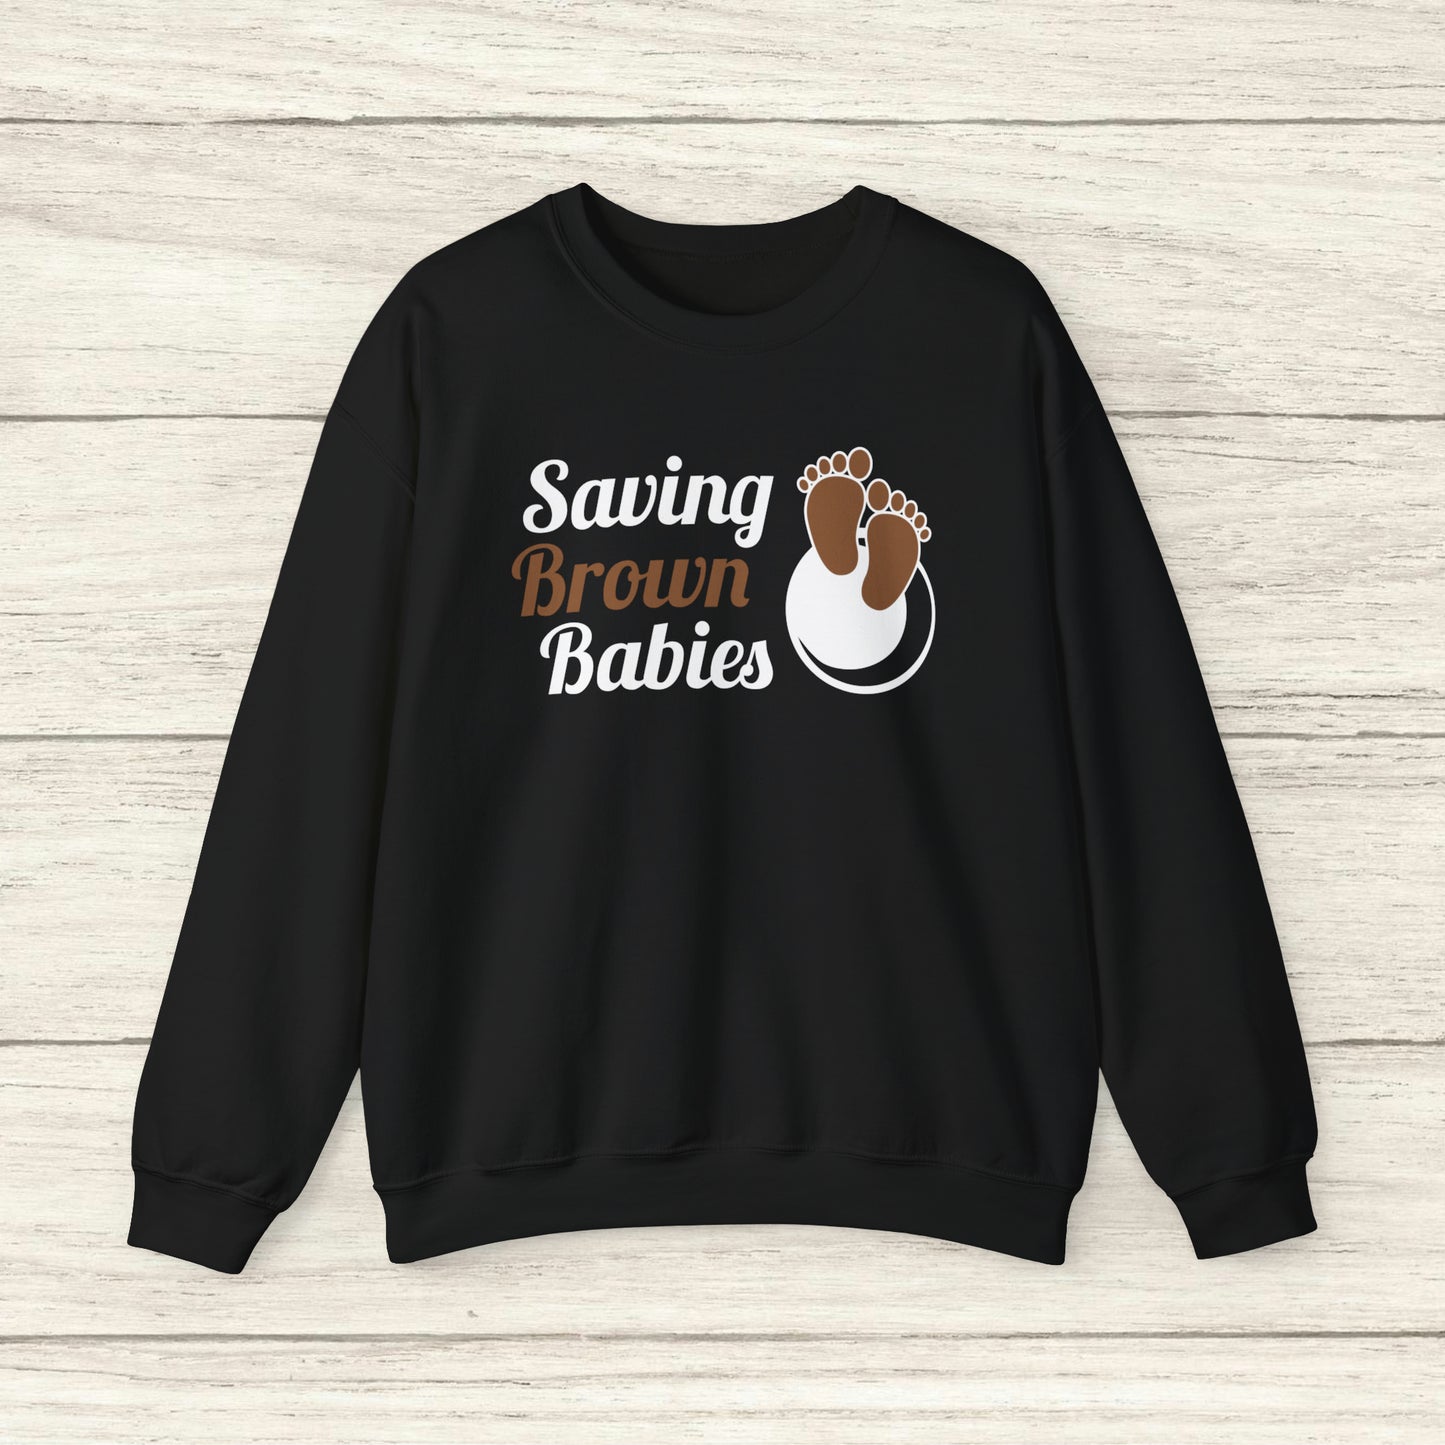 Quietly United in Loss Together Non-Profit / Saving Brown Babies Charity Crew Neck Sweatshirt, Pregnancy & Infant Loss Awareness